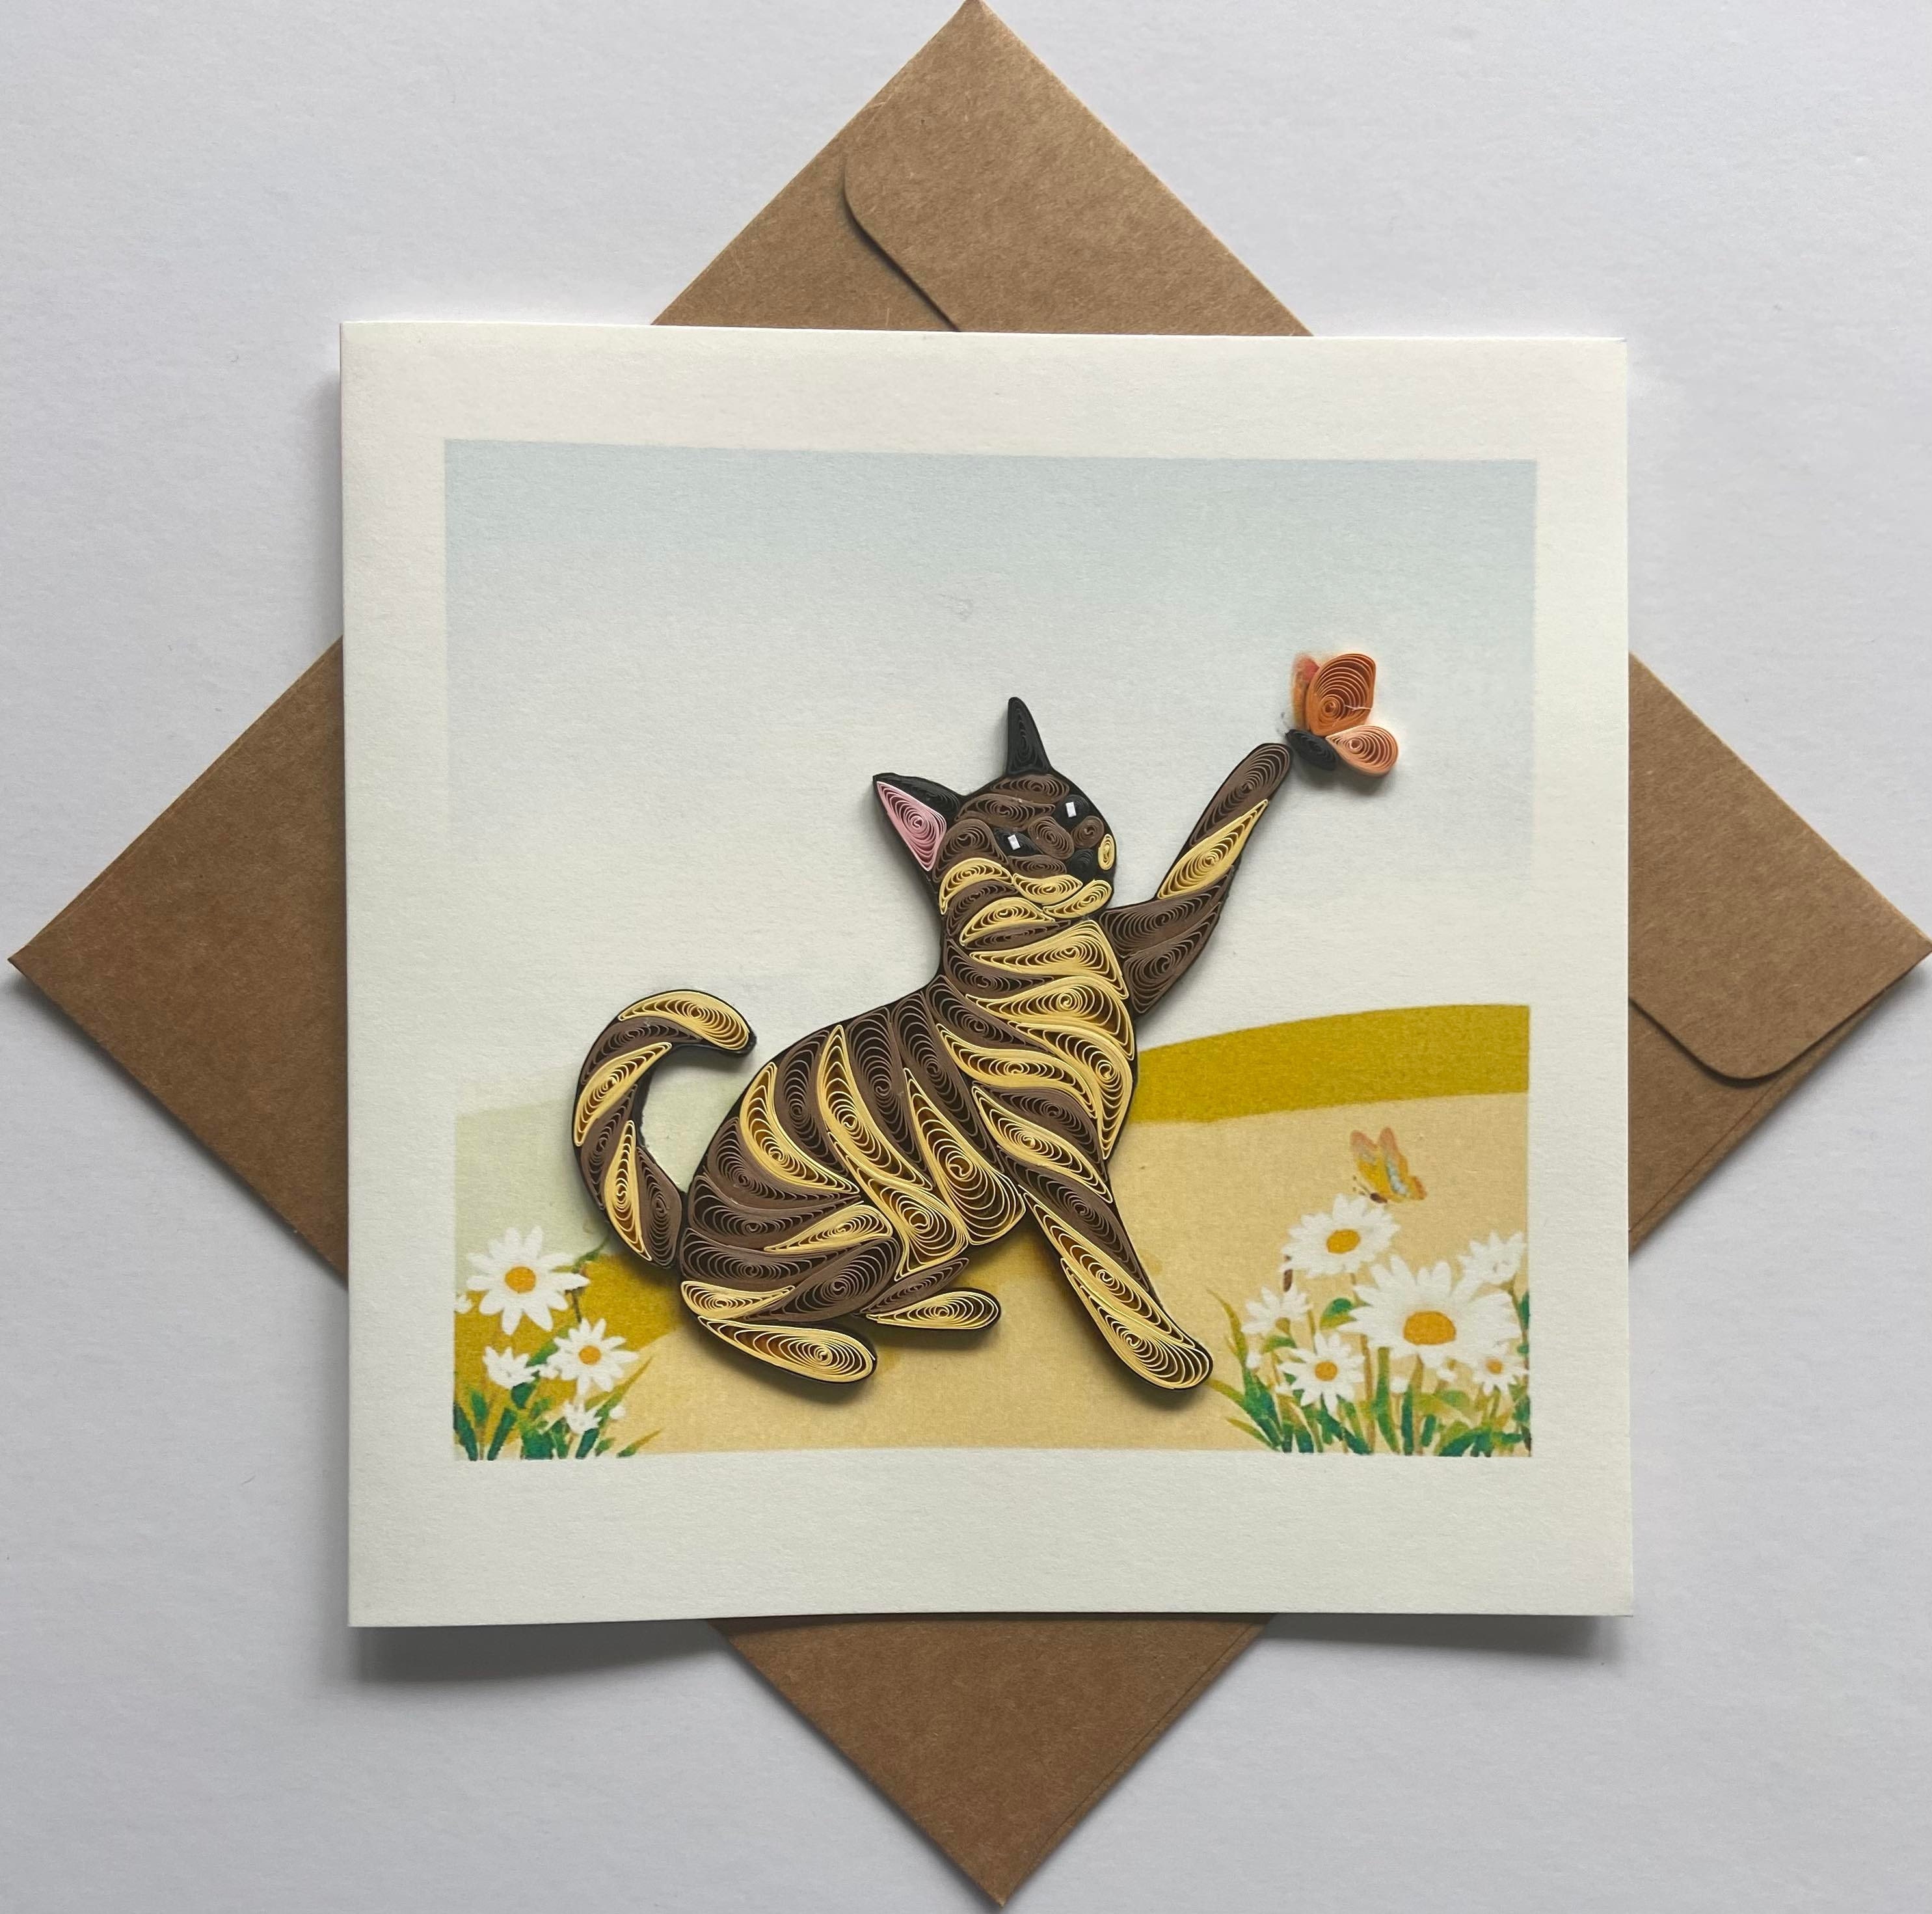 Paper quilling animal art, cat. Poster for Sale by DEGryps